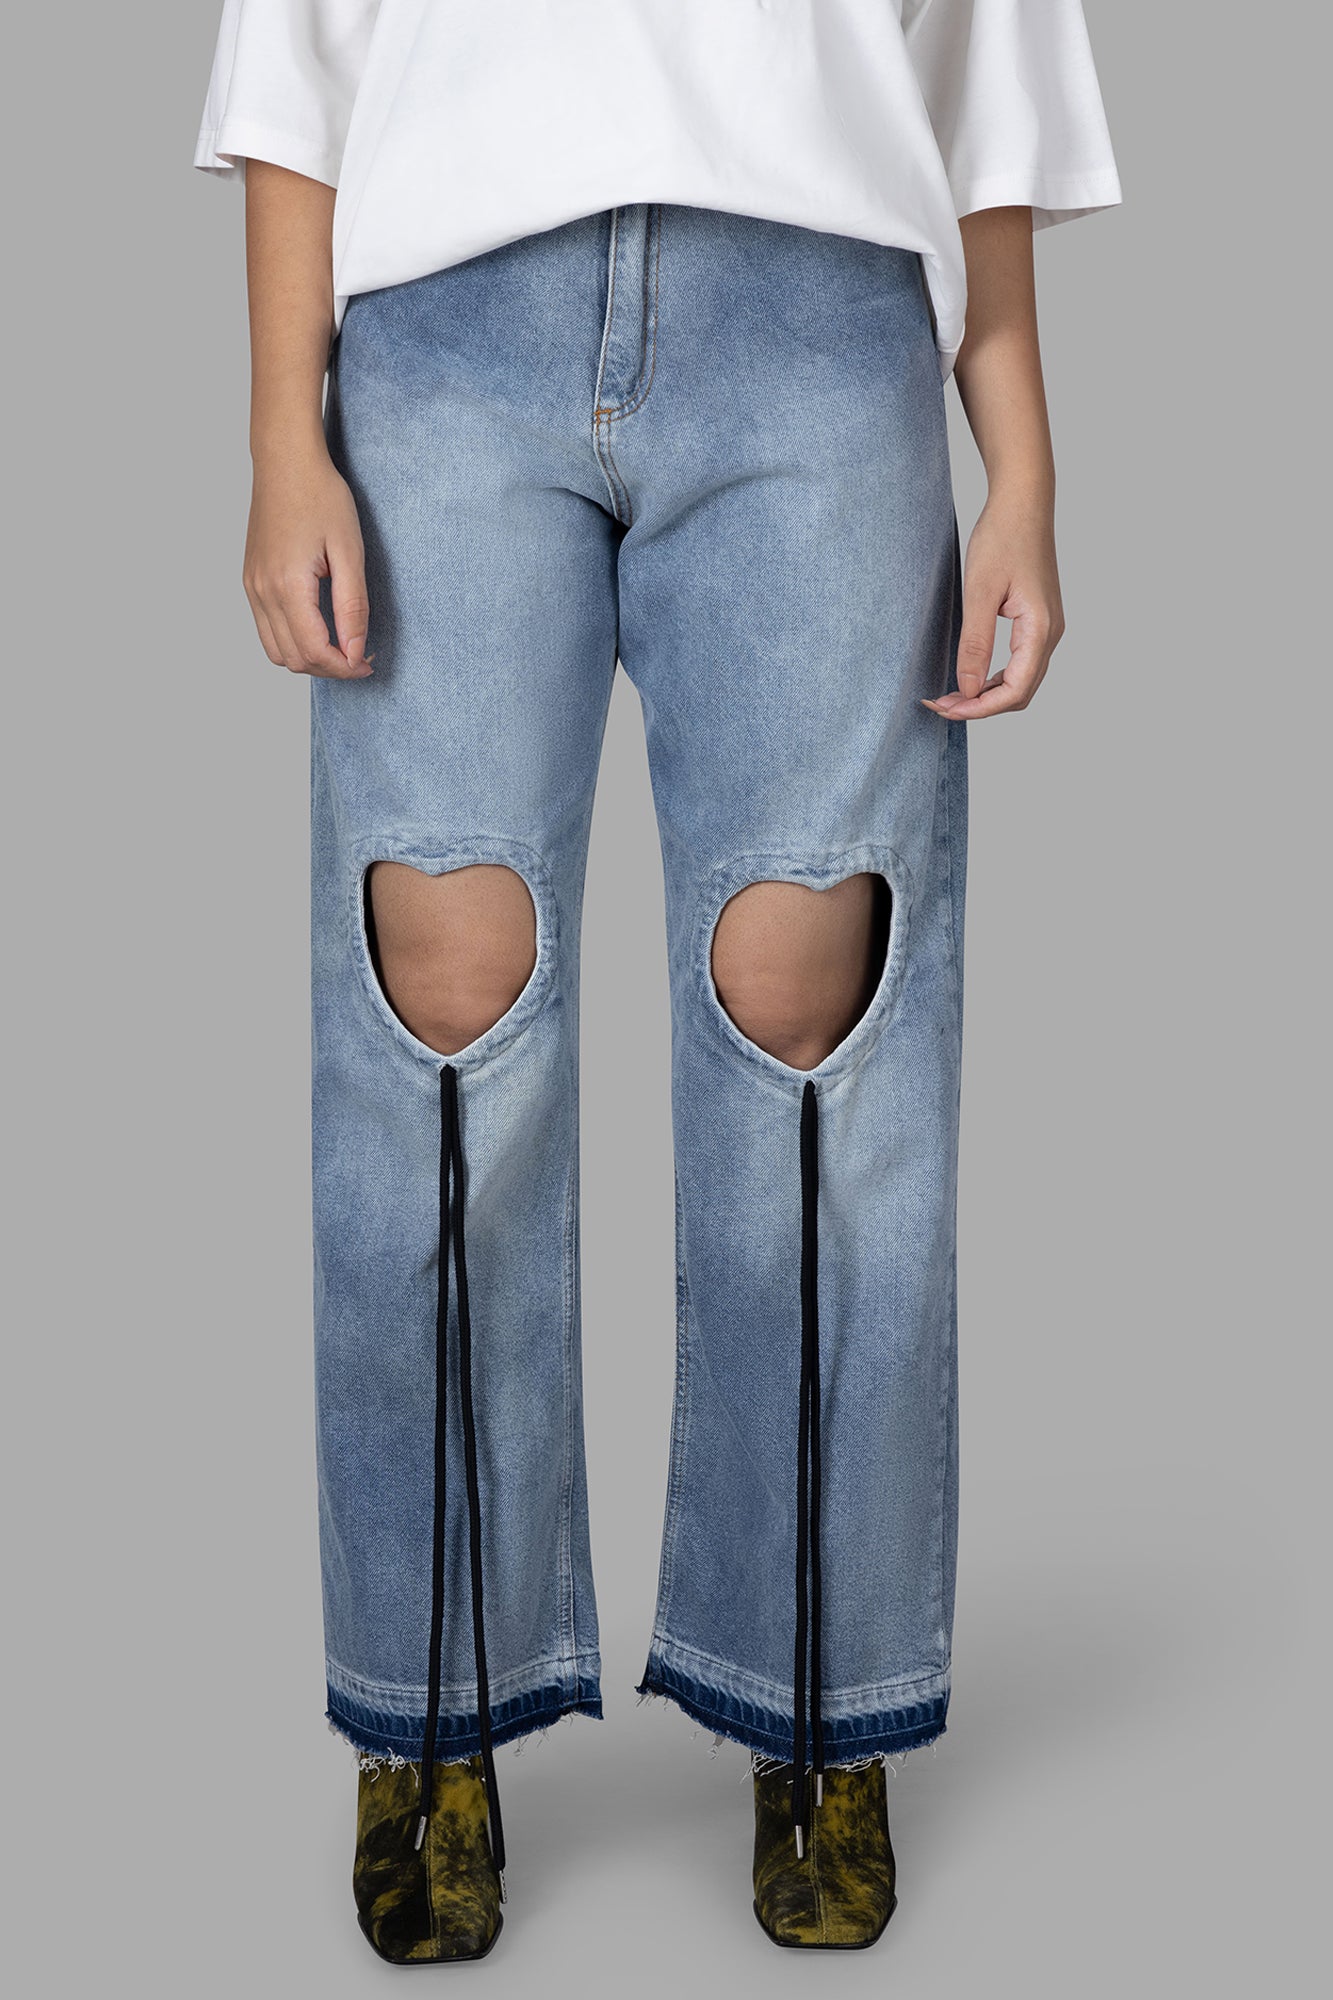 Heart Cut-out Jeans